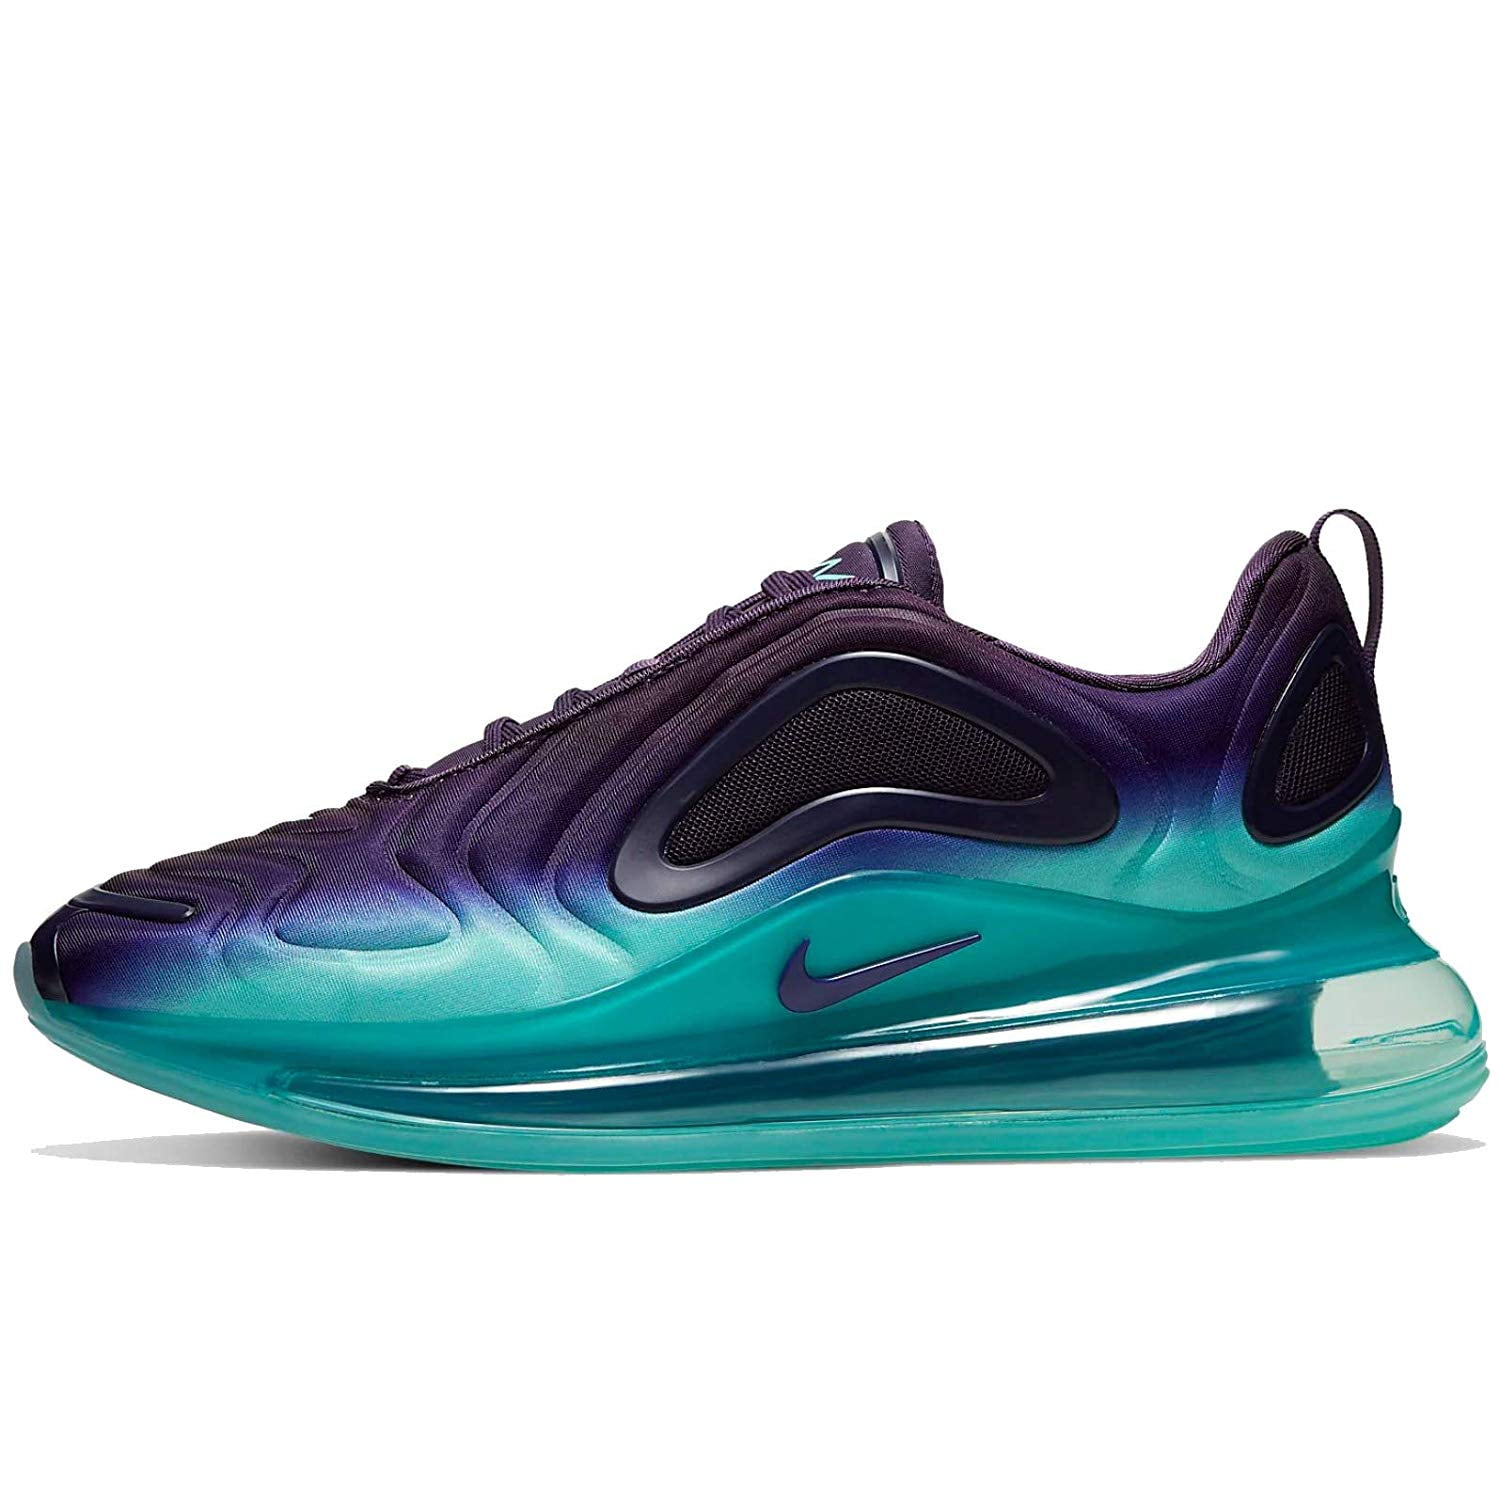 are air max 720 good for running